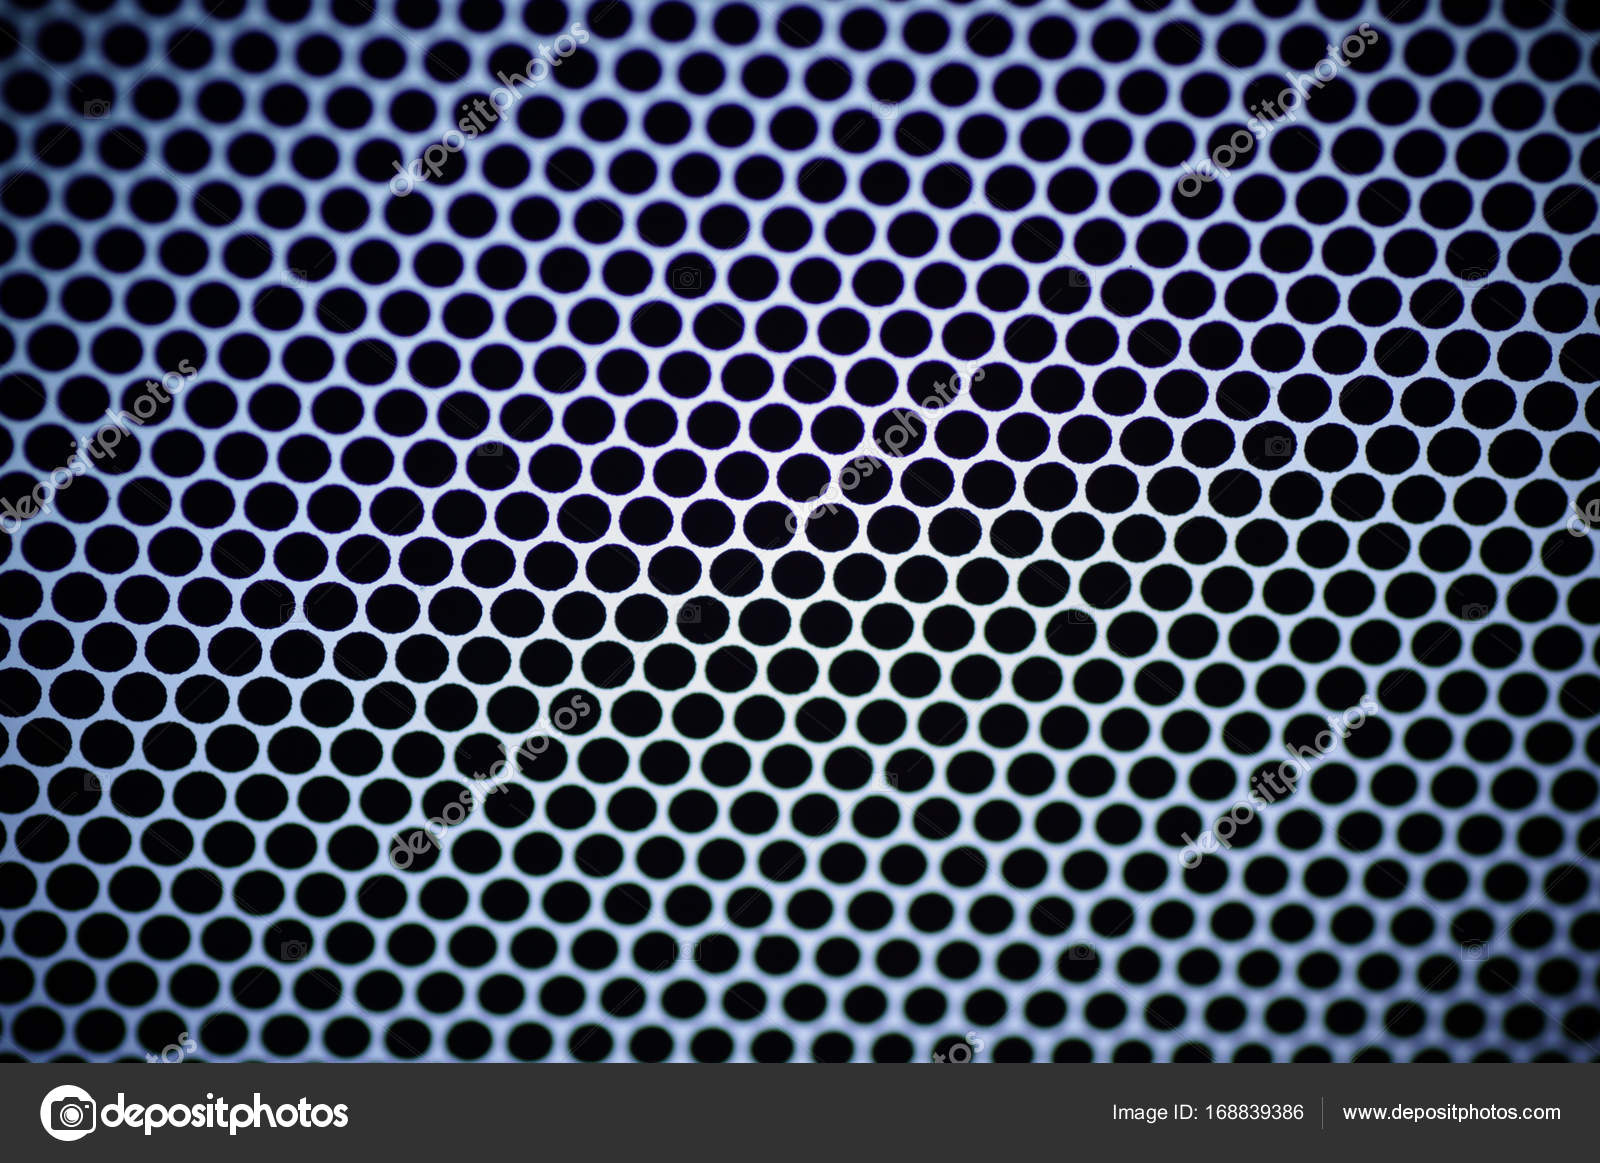 Hexagonal Cell Texture Honeycomb Speaker Grille Background Stock Photo C Ngad